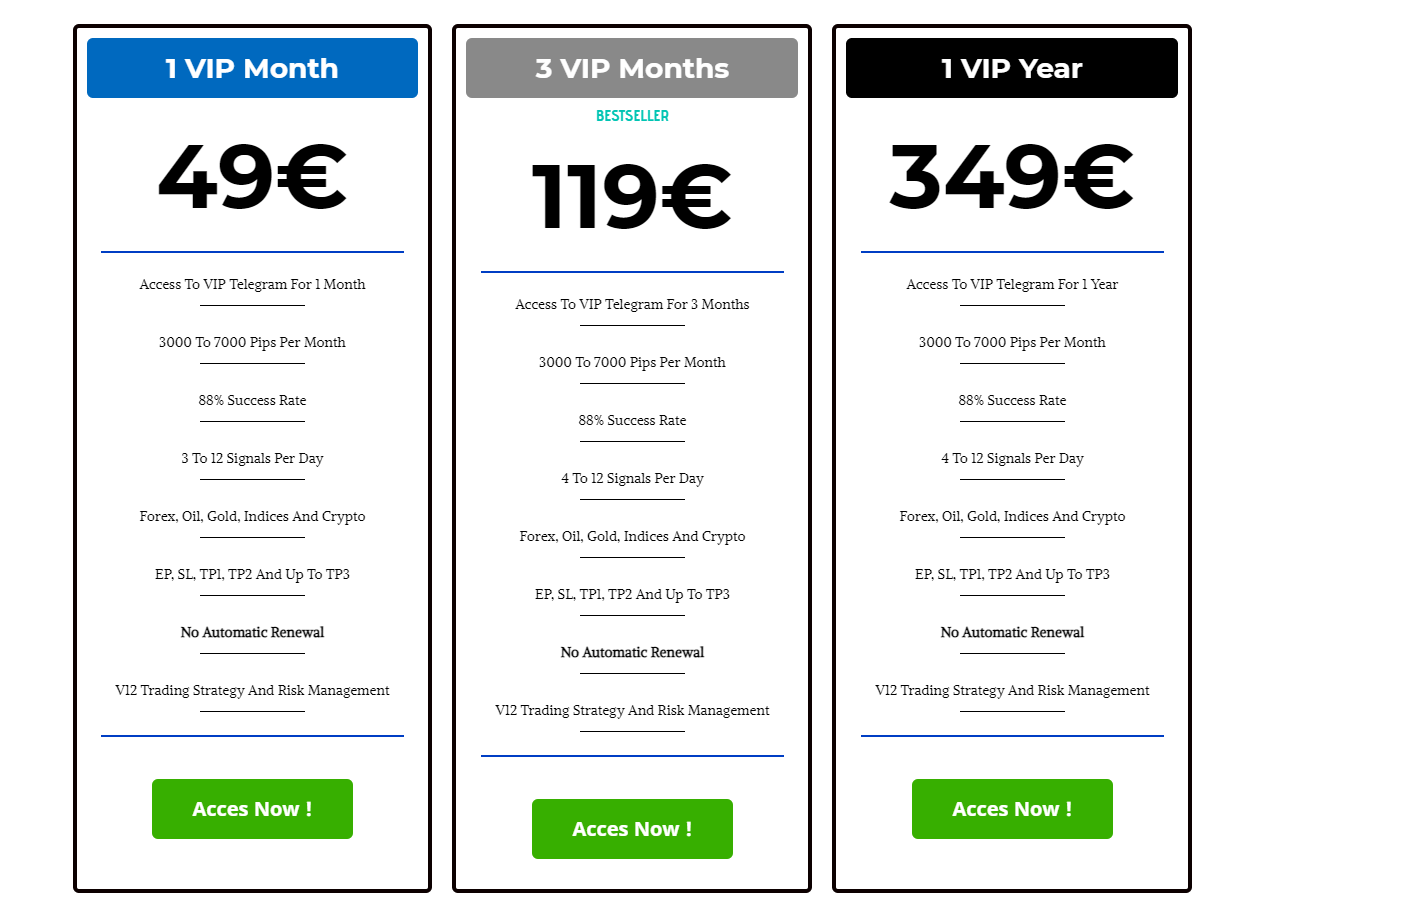 Pricing plans of V12 Trading